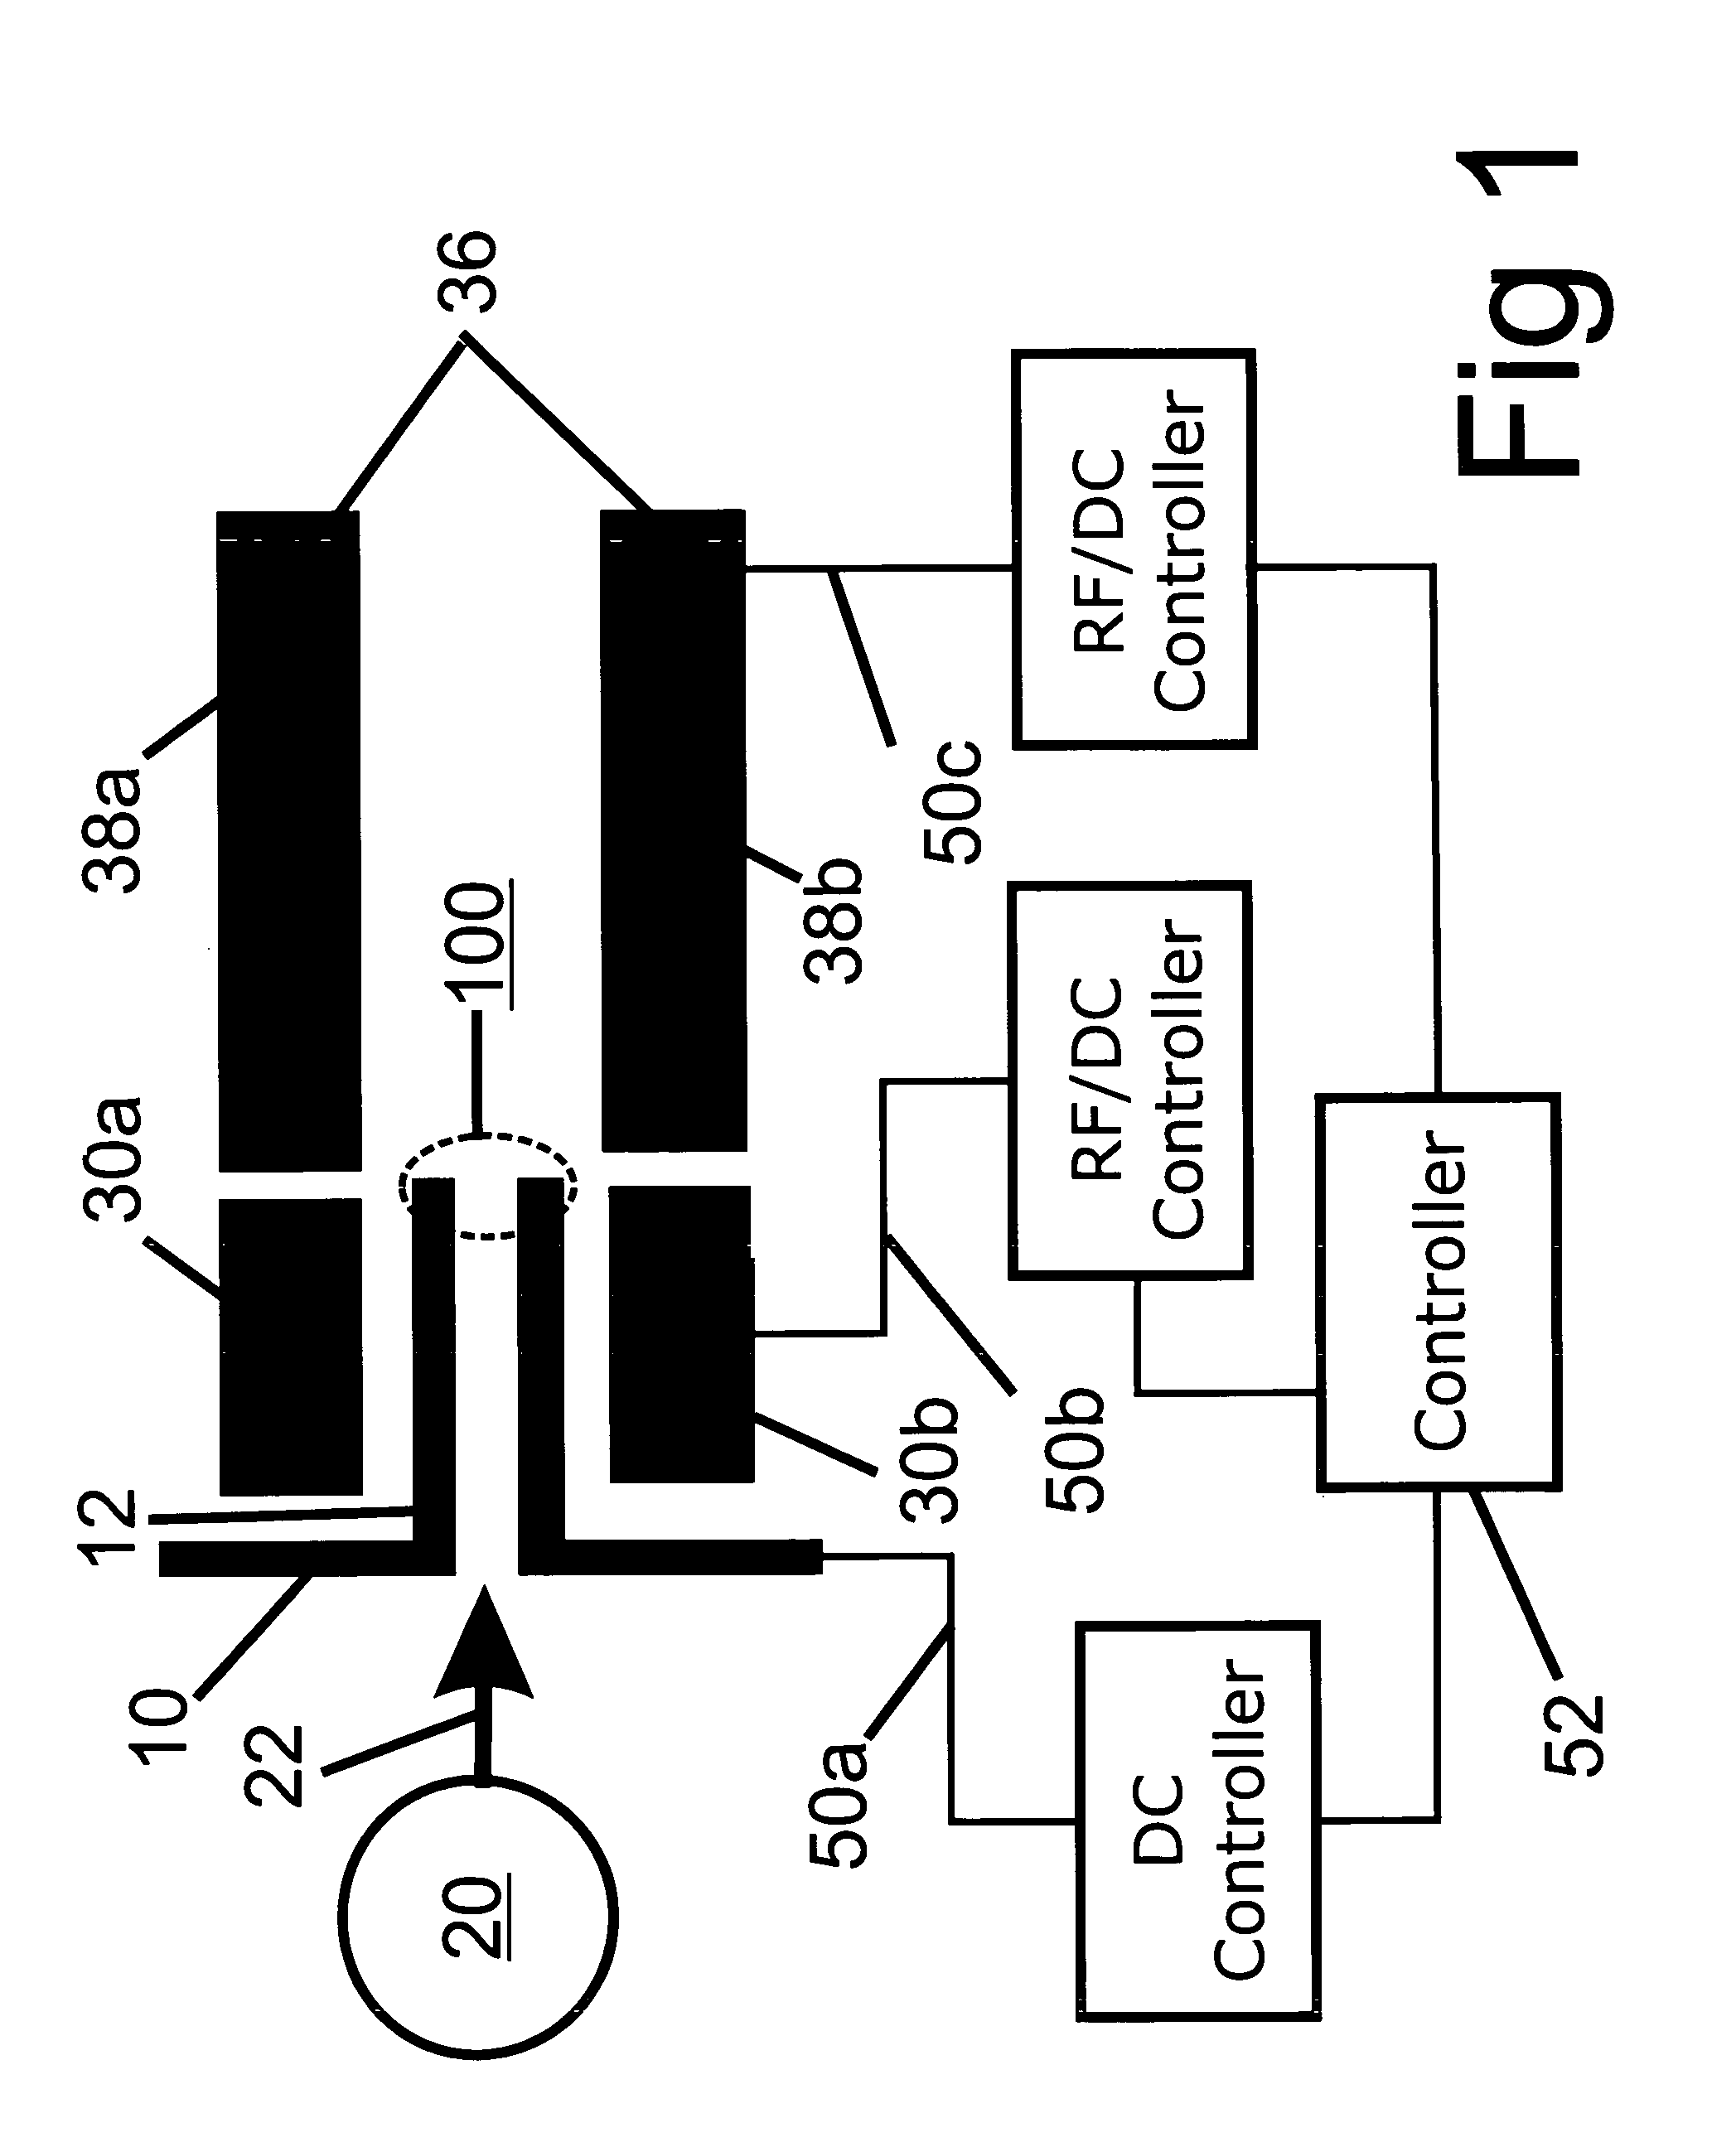 Radio frequency lens for introducing ions into a quadrupole mass analyzer